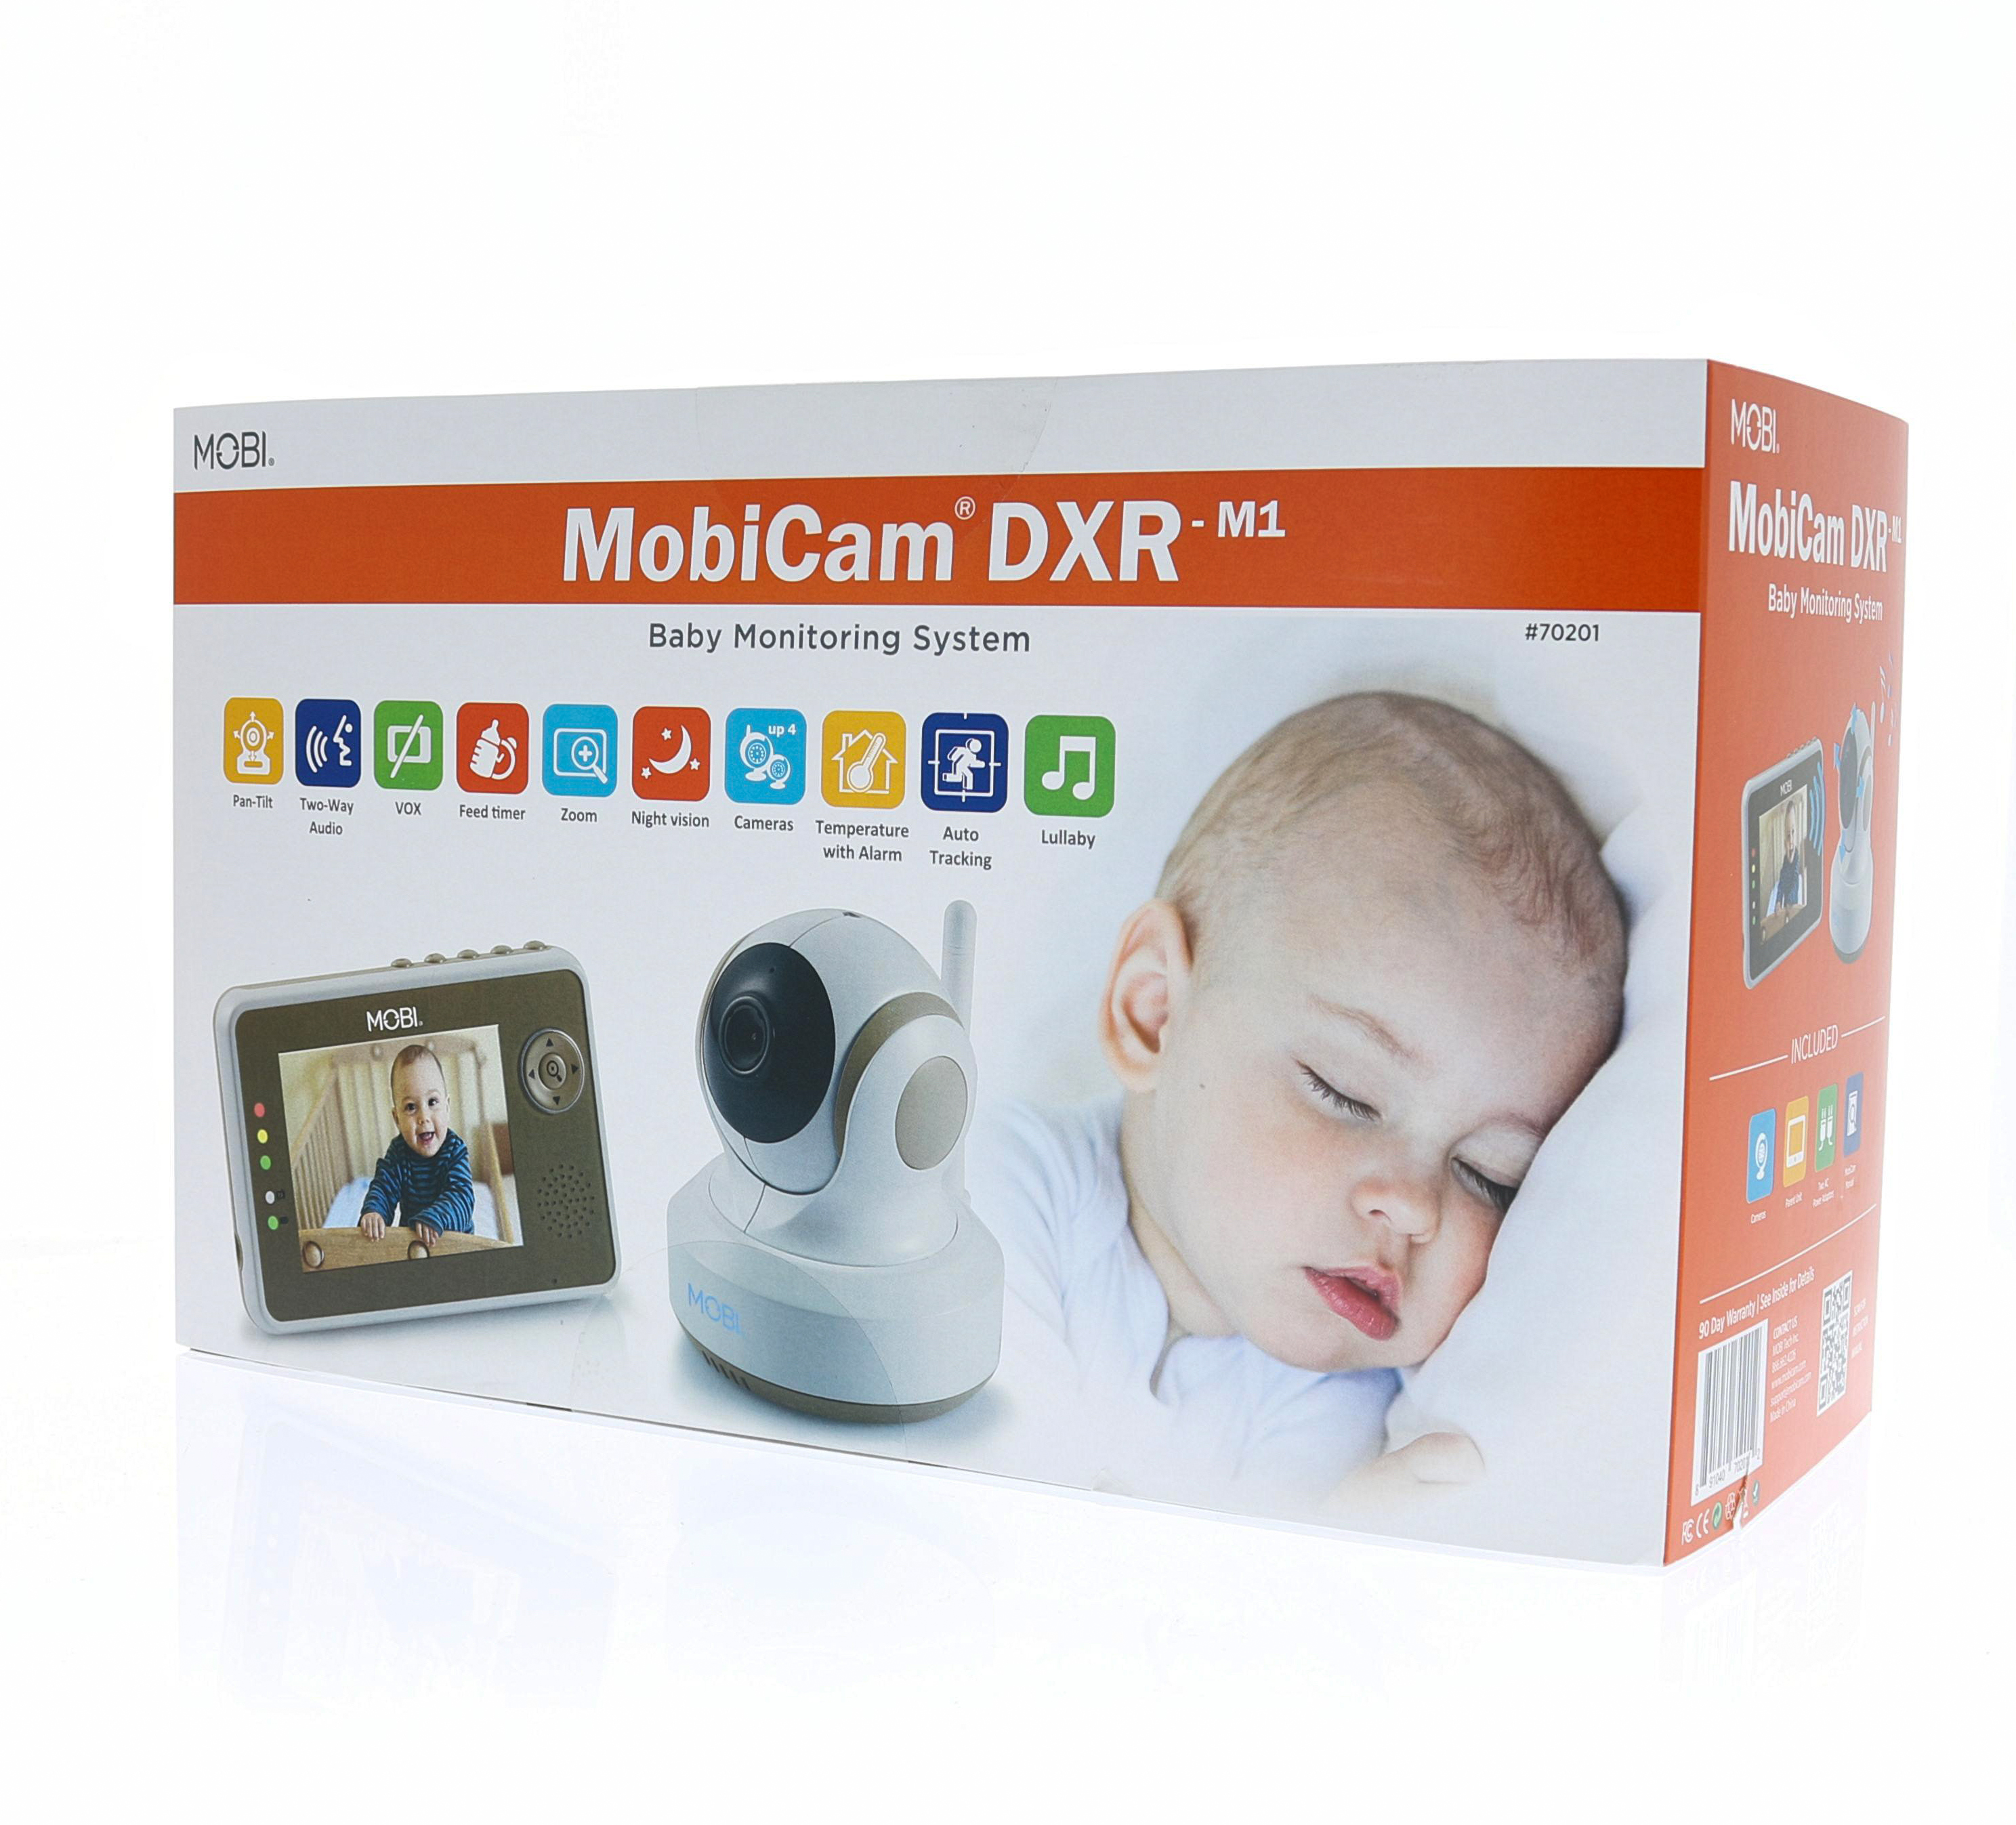 MobiCam DXR-M1 Baby Monitoring System With Smart Auto Tracking, Room Temperature, Lullabies - image 2 of 7